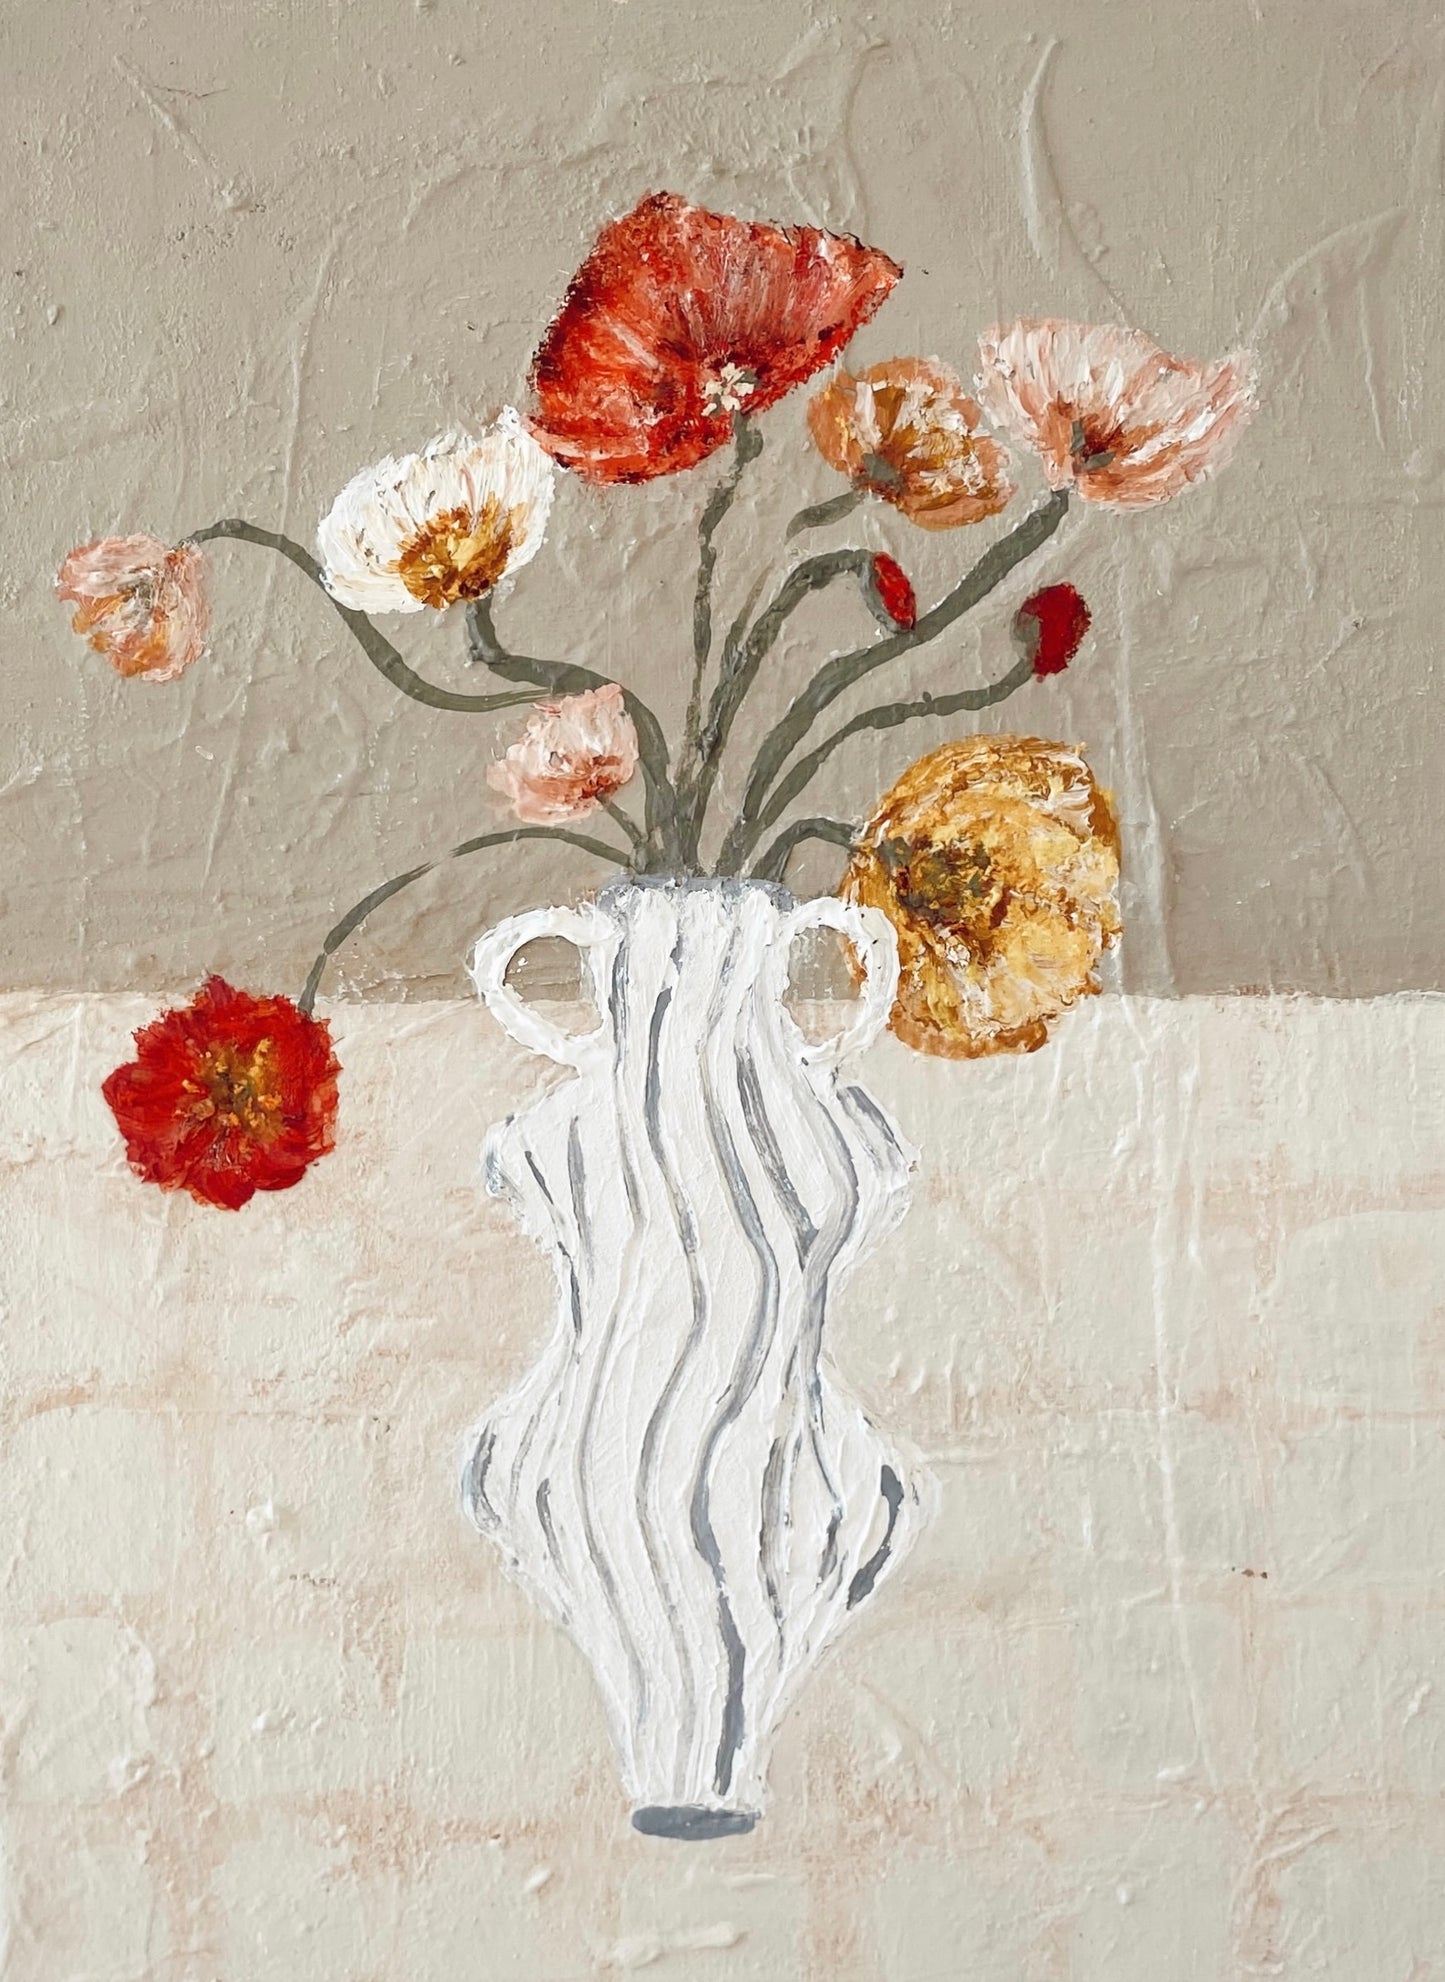 Artwork of a striped vase with poppies over a neutral background